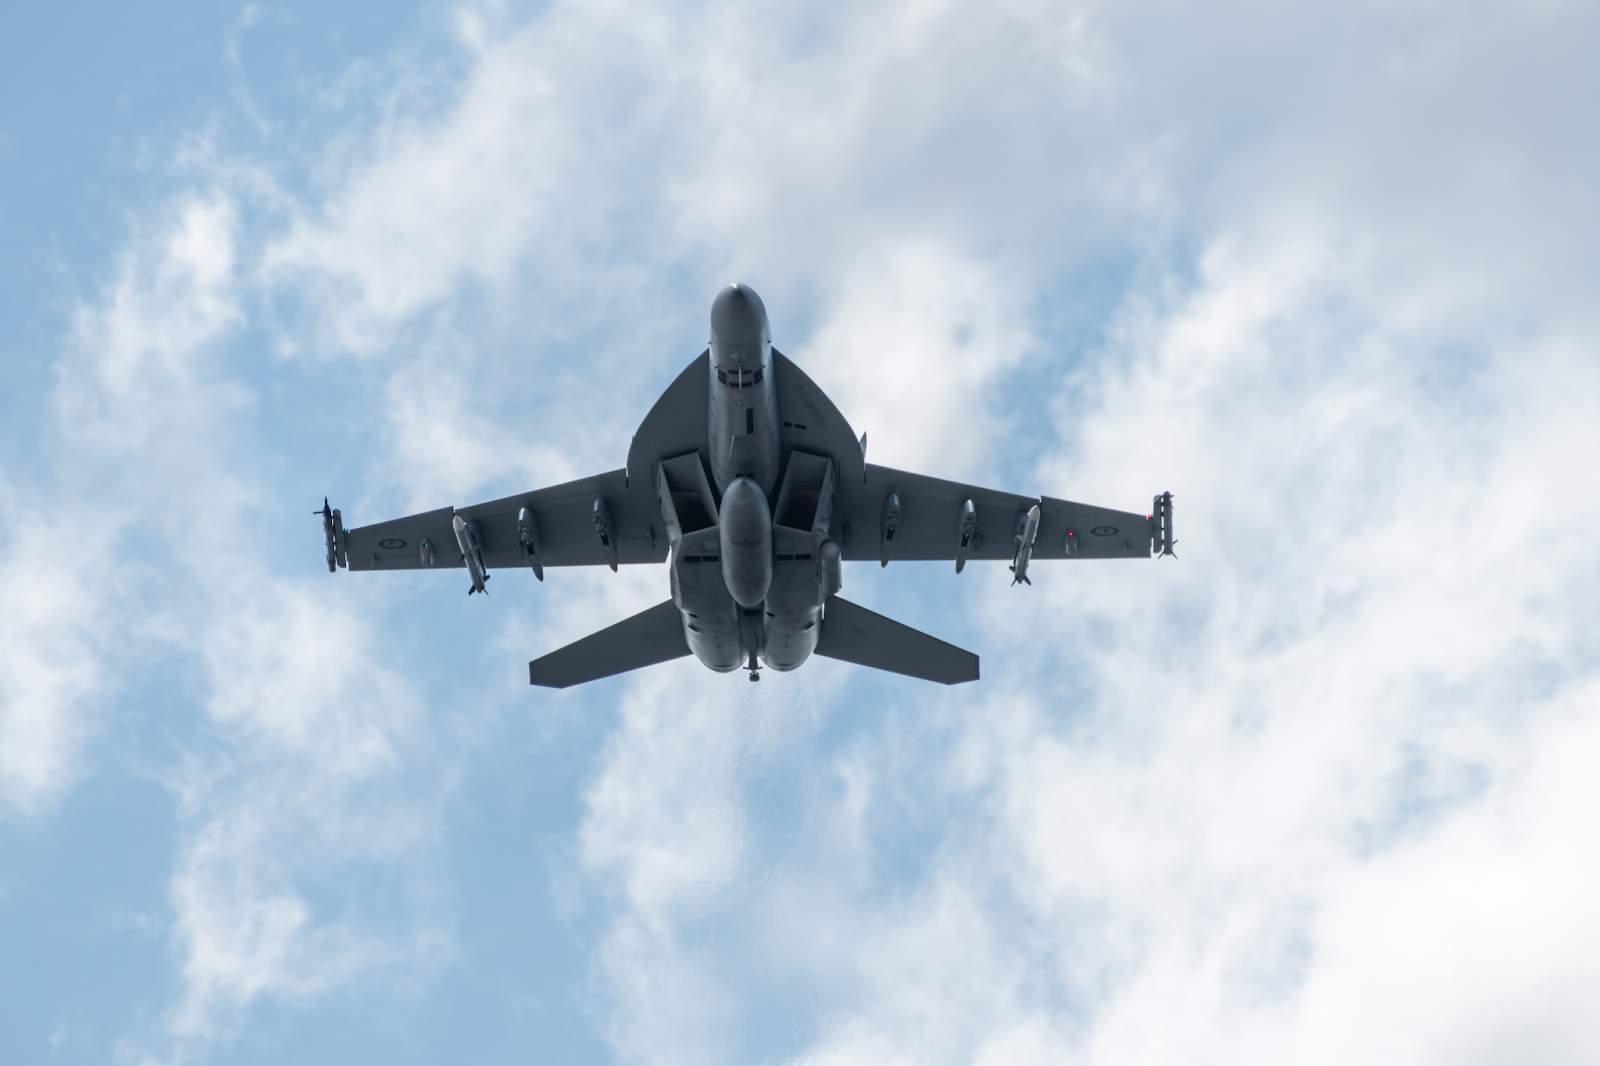 The Royal Australian Air Force’s F-18 Fighter Jet